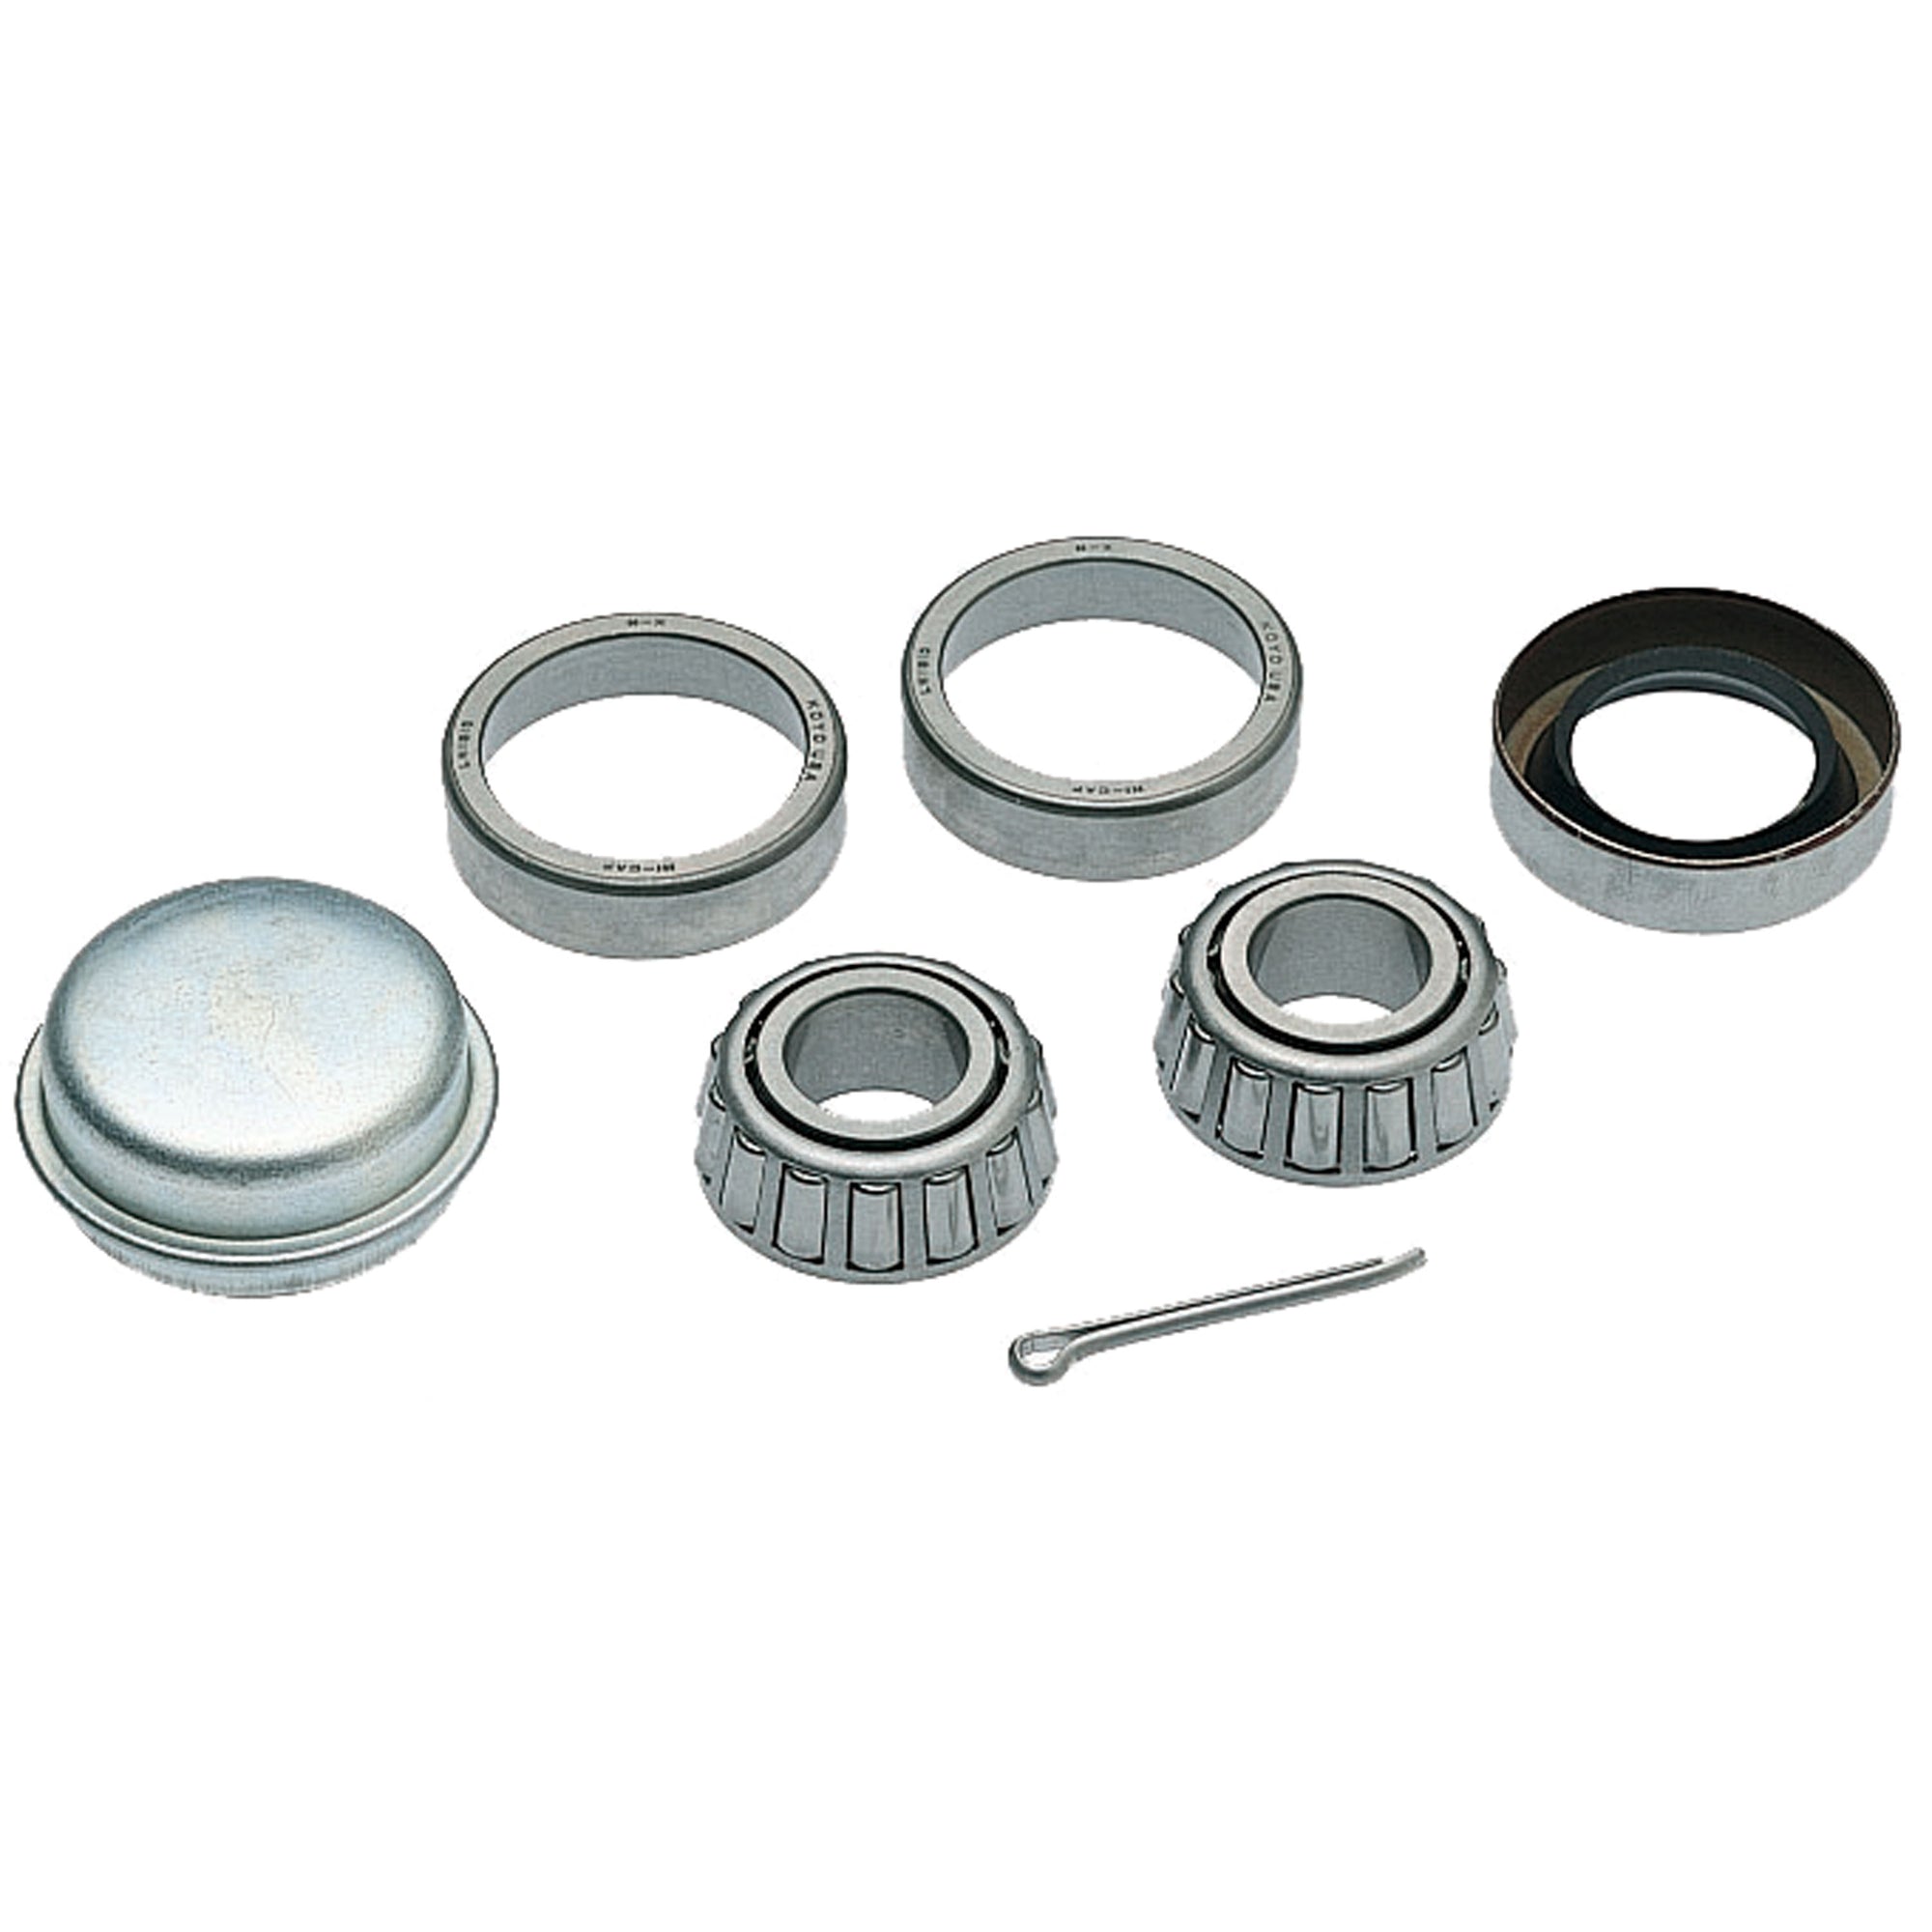 Dutton-Lainson 21813 6500 Series Bearing Set - 1-1/4 in. x 3/4 in. Spindle, 1.781 Outer Hub